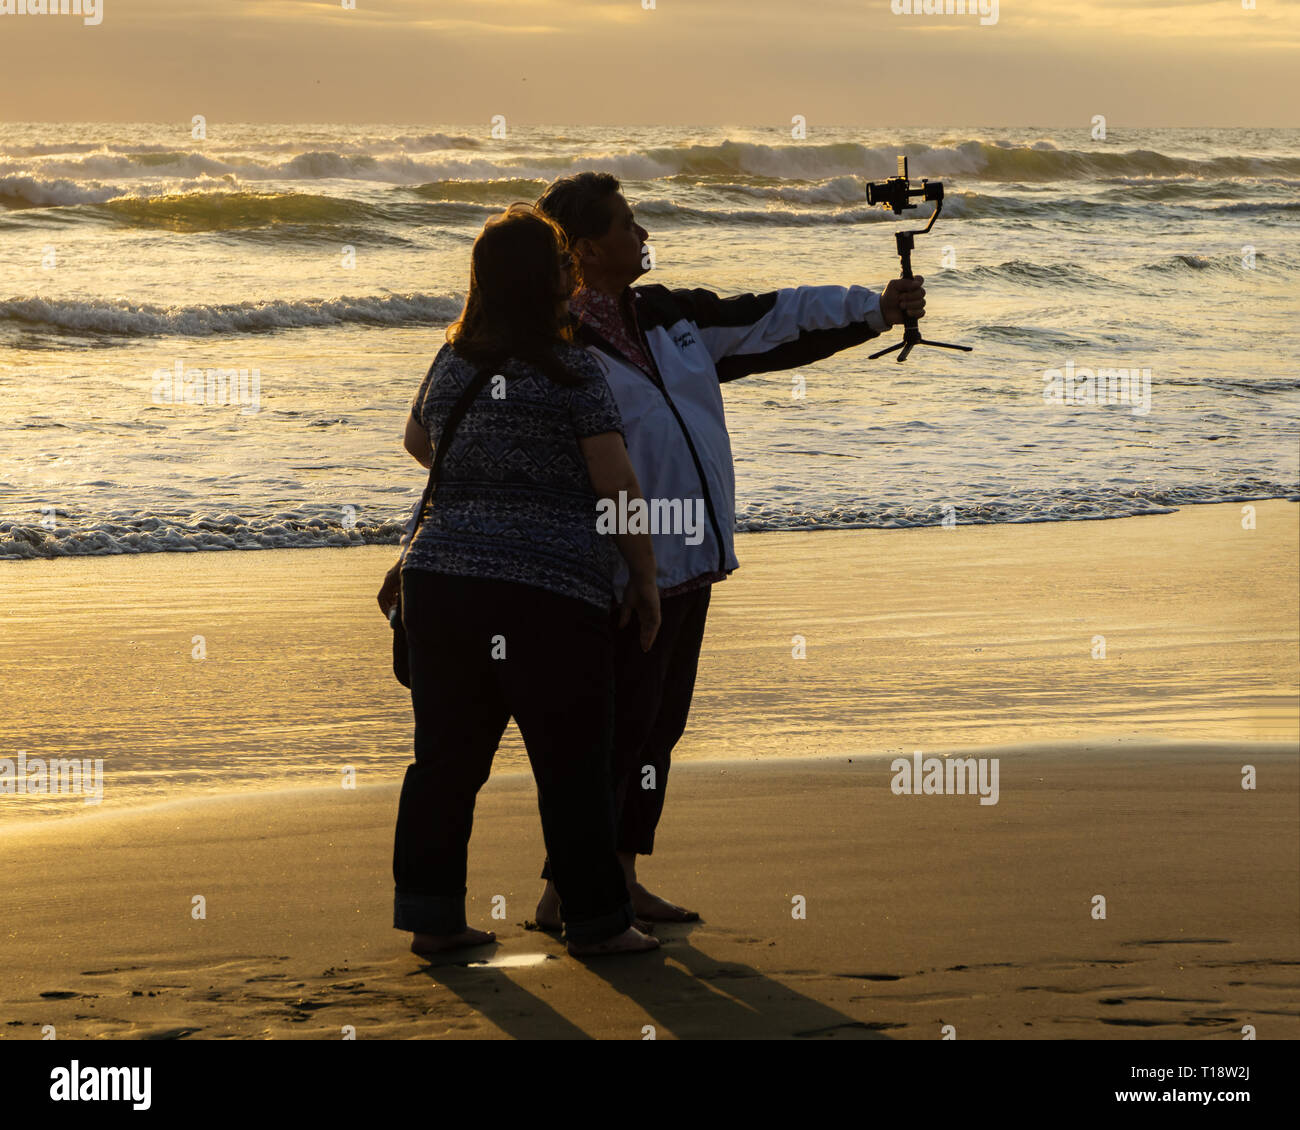 Two adult people vlogging on the beach at sunset. Man holding his camera to vlog. Cannon Beach, OR, USA. Stock Photo